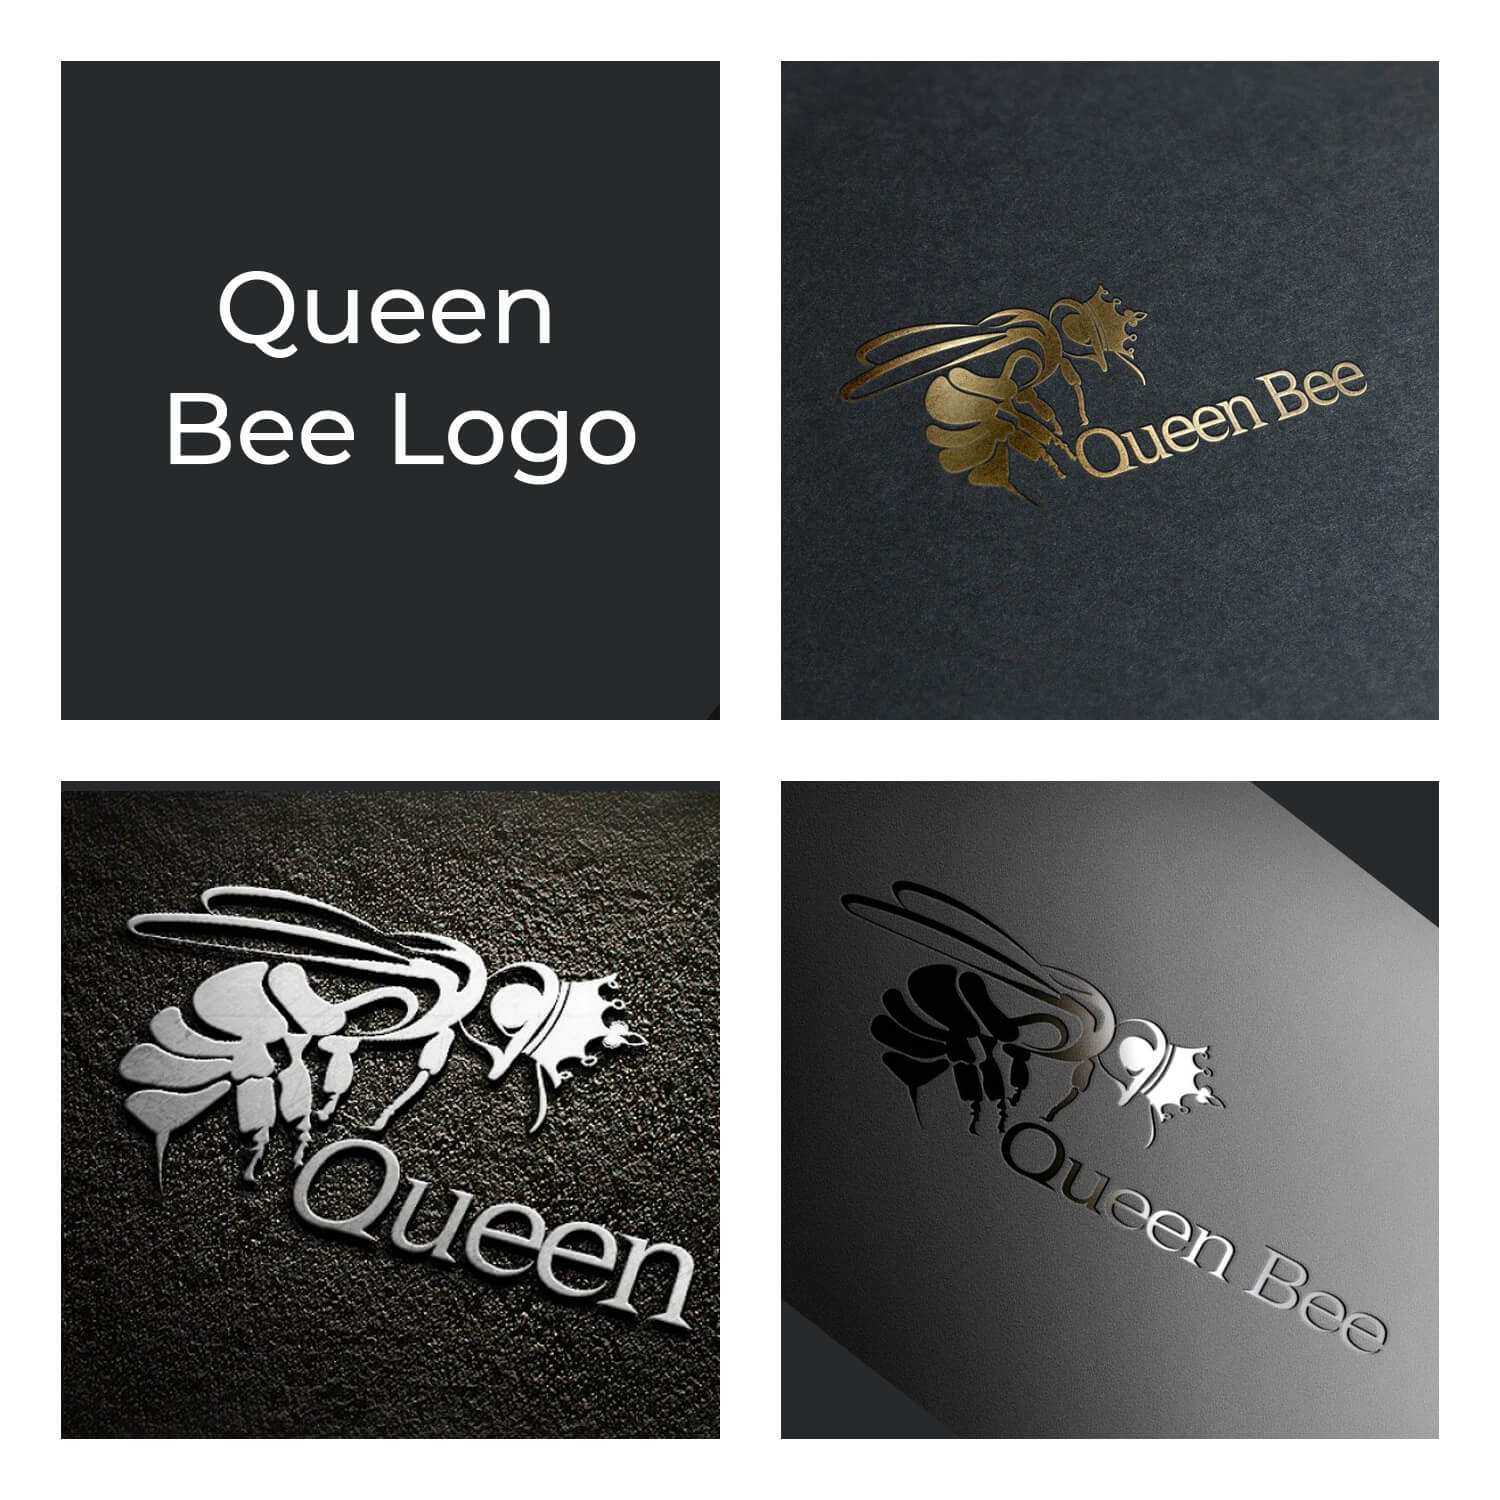 Four images with the inscription "Queen bee" and images of bees in gold, white and black.